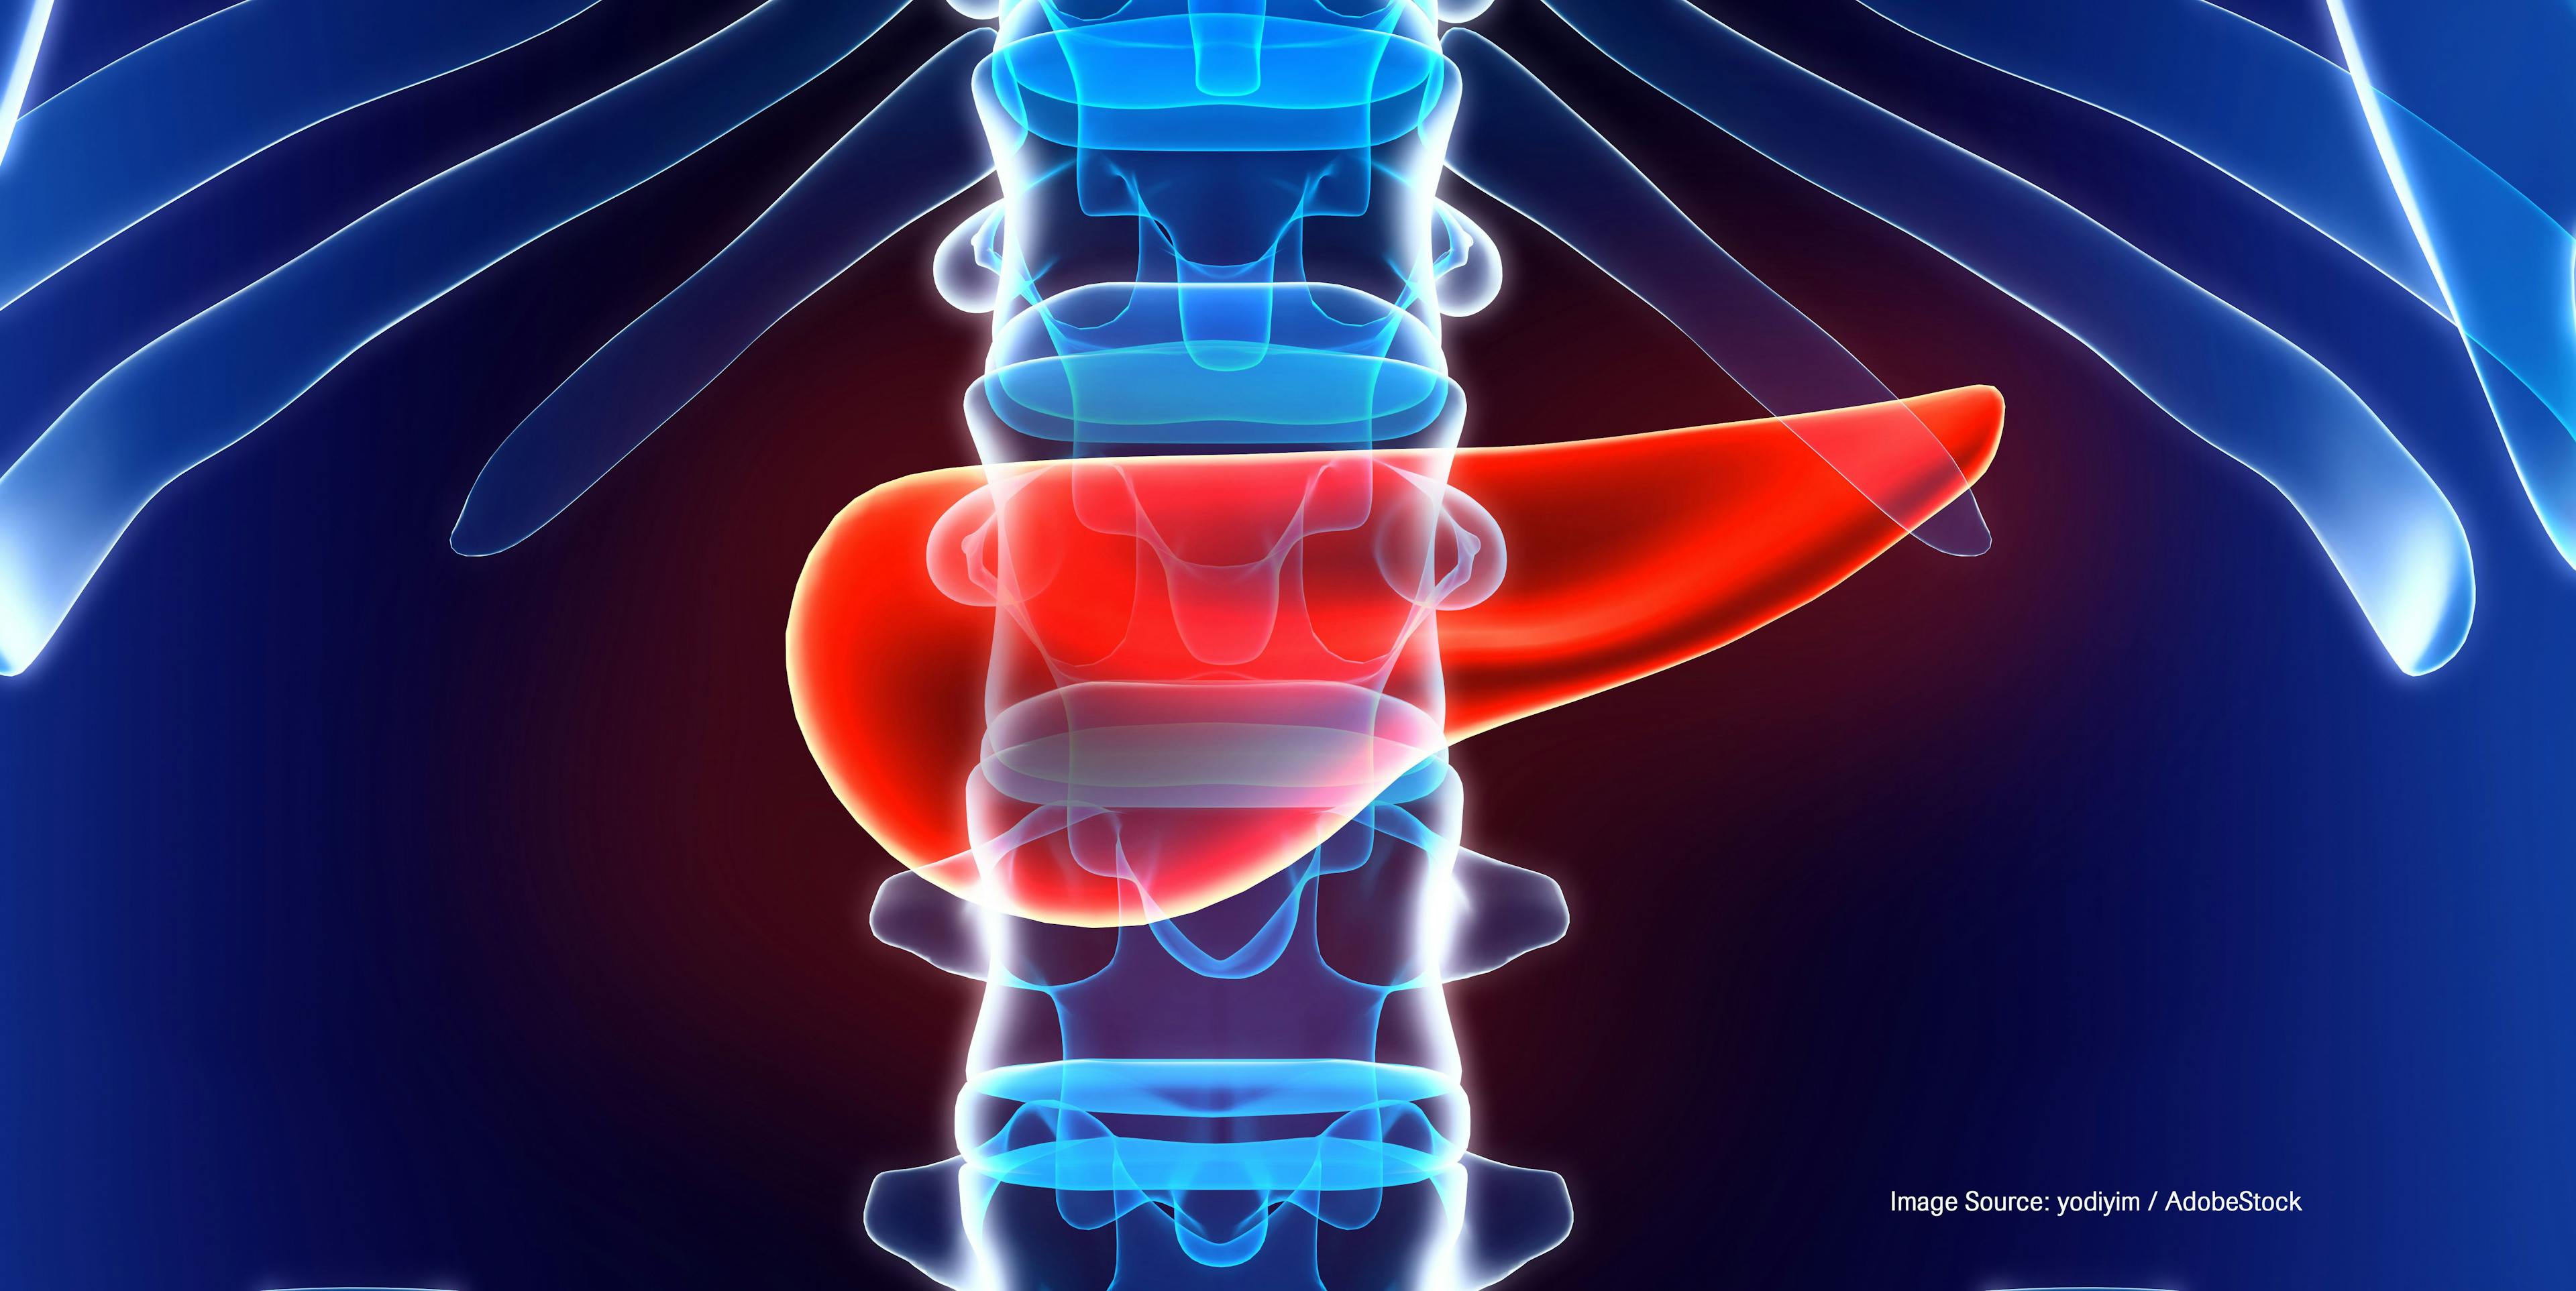 Adjuvant Therapy Questioned for Patients With Small Pancreatic Tumors